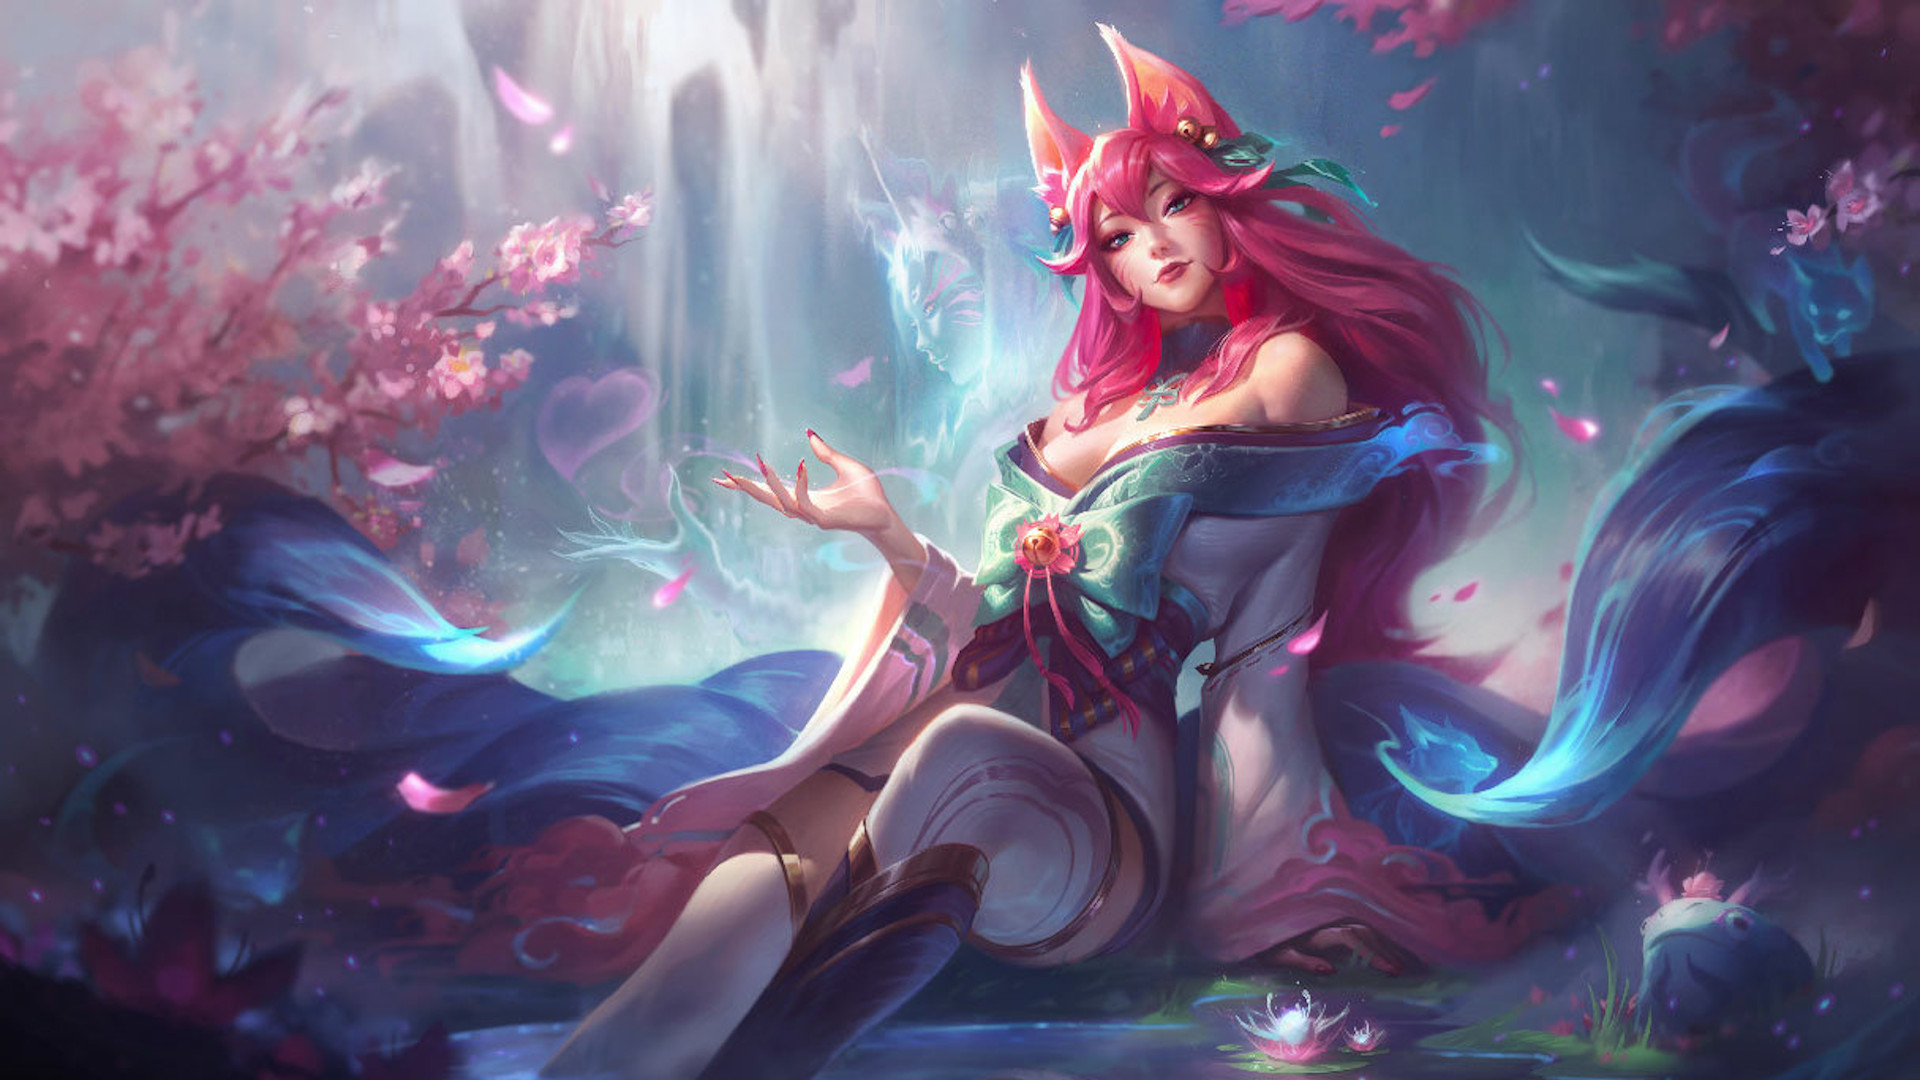 Amazon Prime is offering a year’s worth of free League of Legends skins